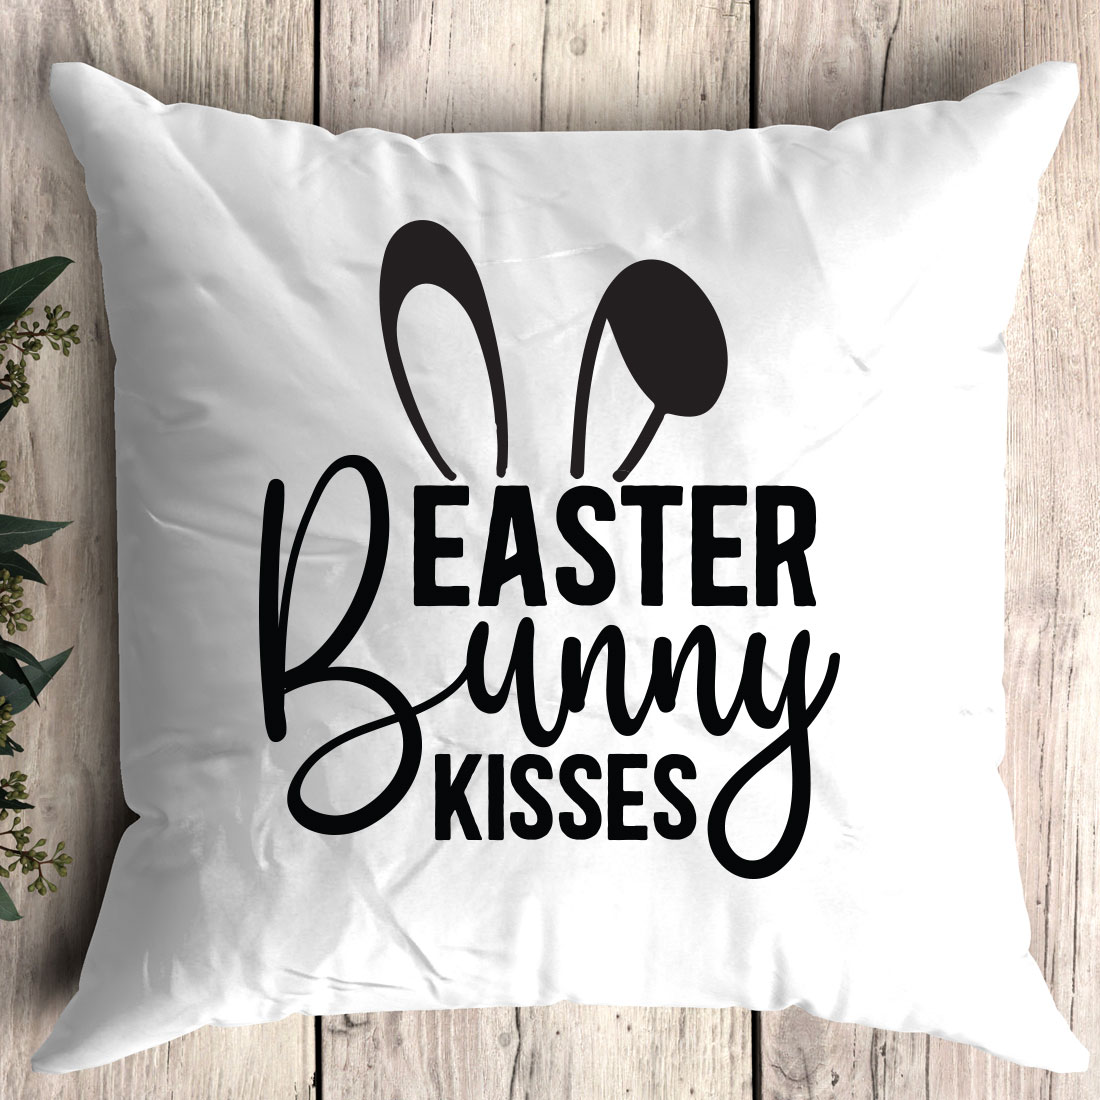 White pillow with the words easter bunny kisses on it.